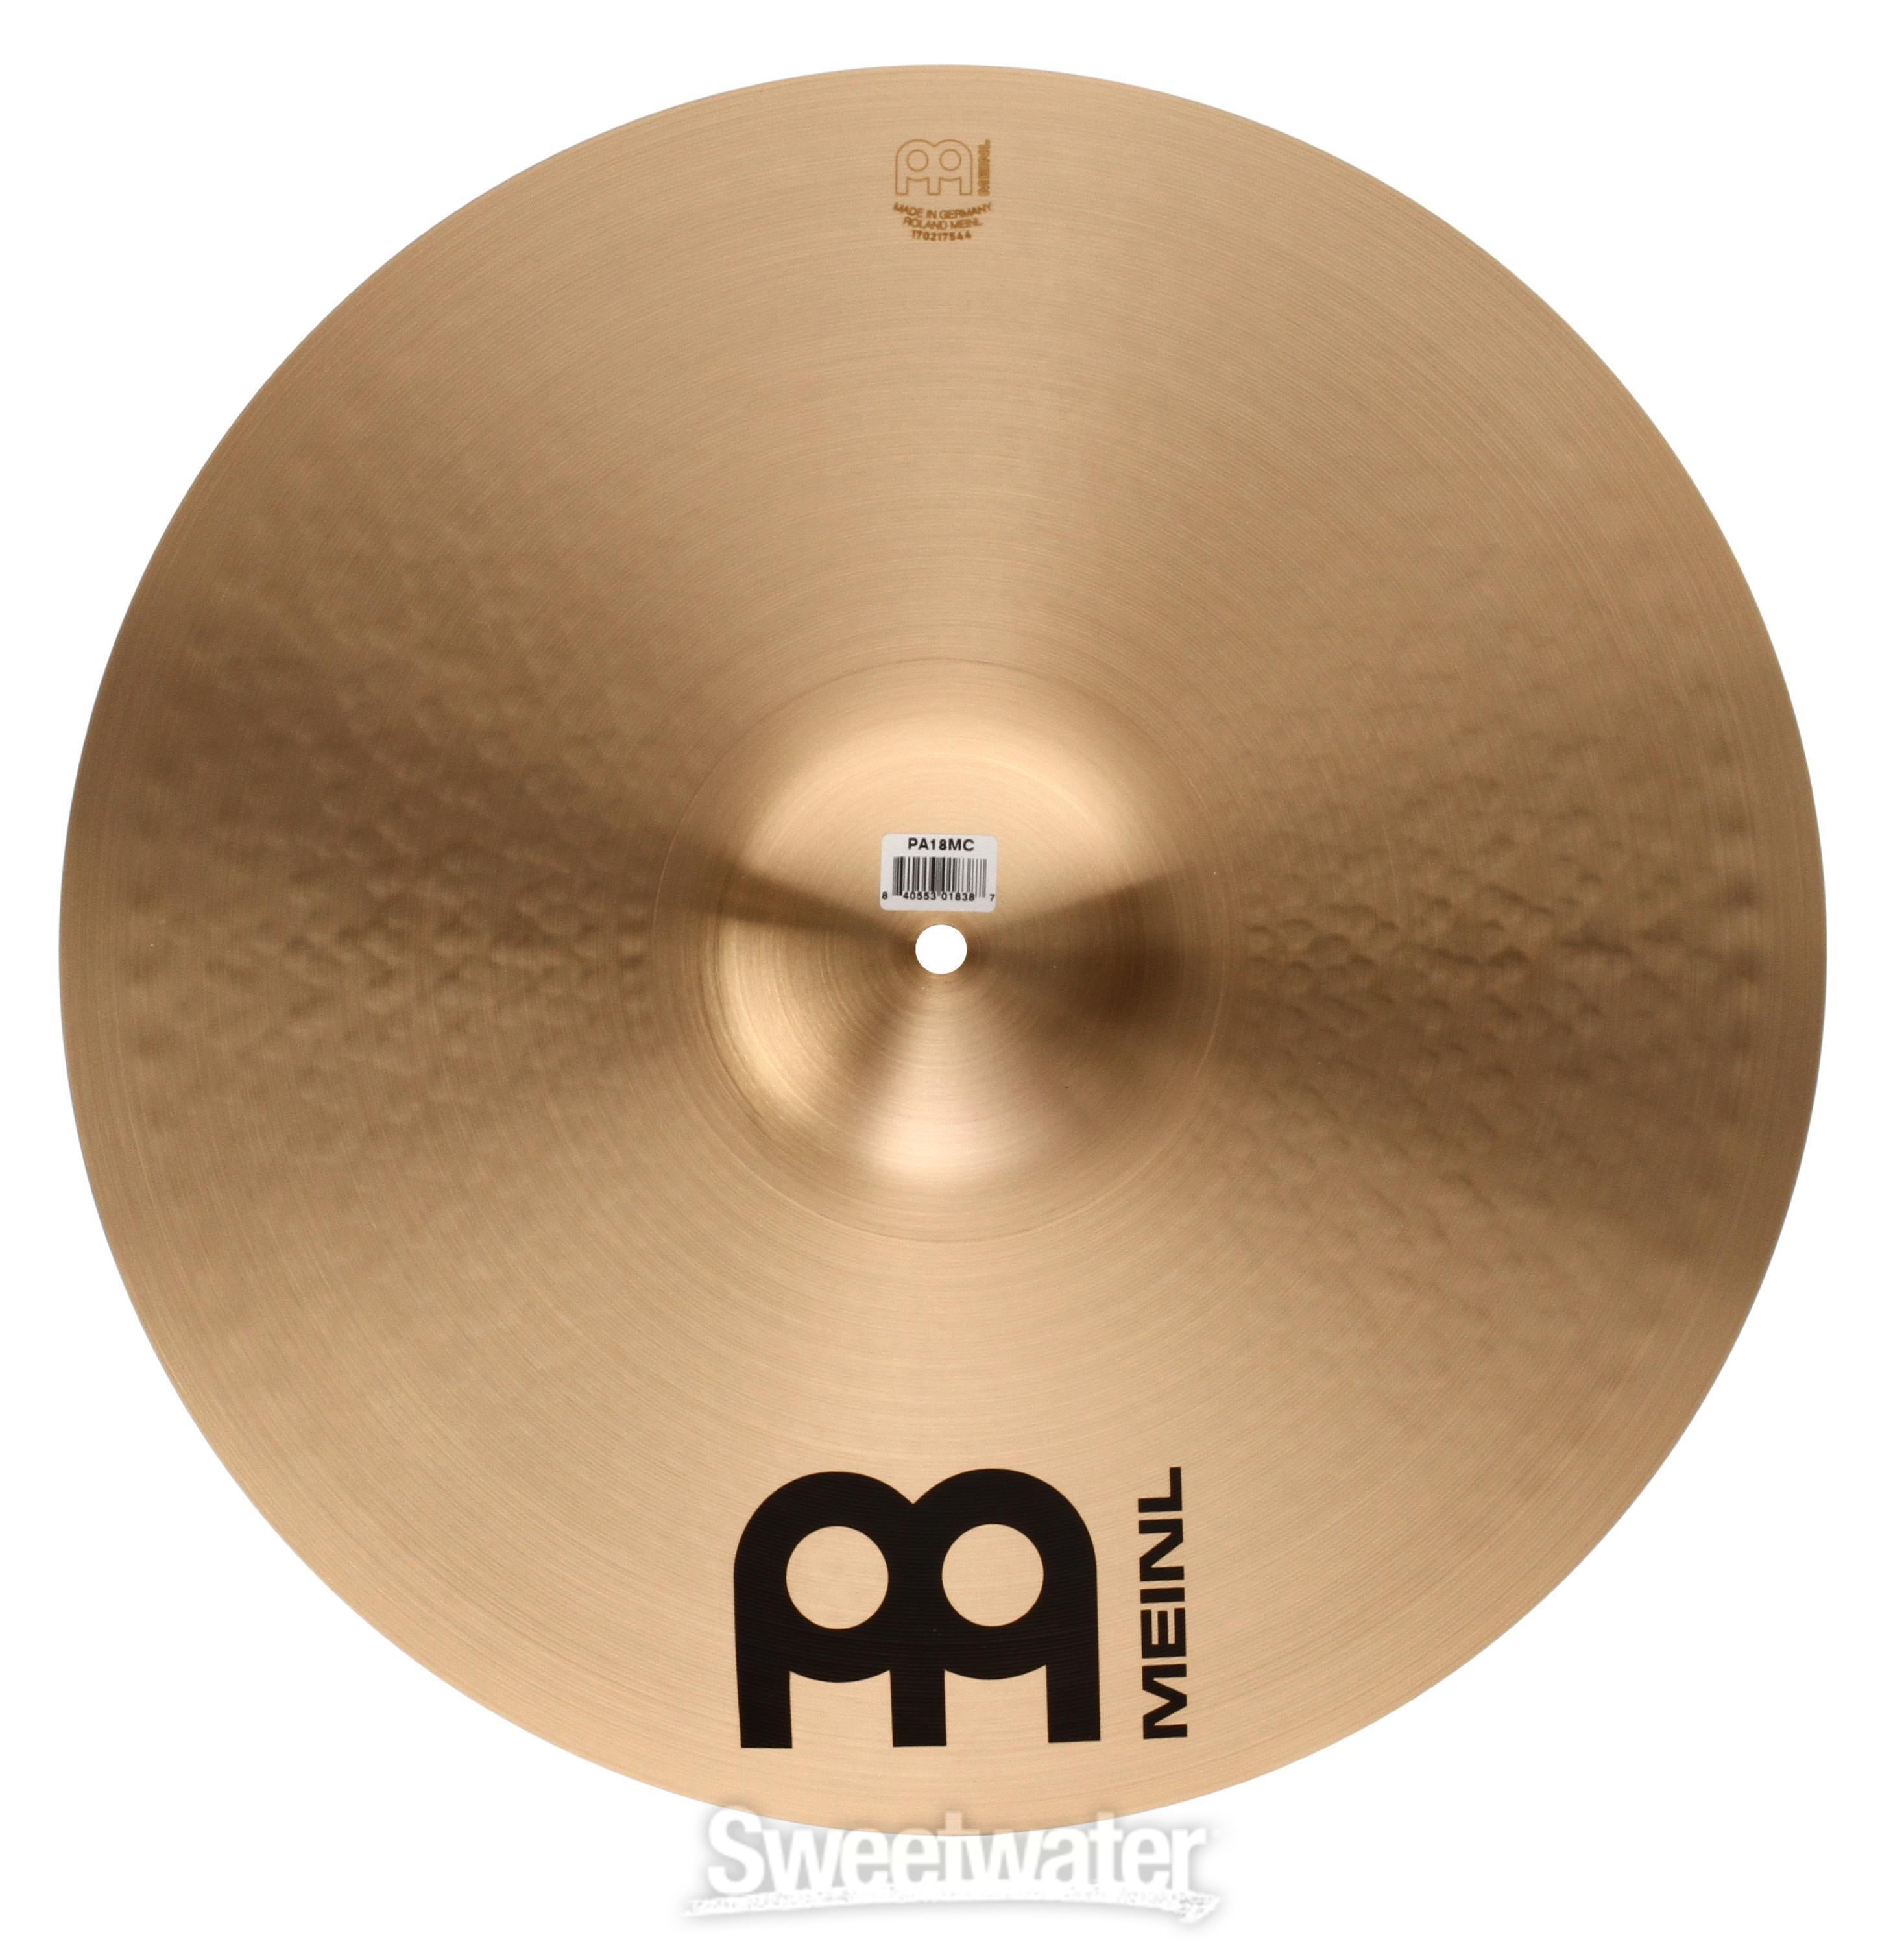 Meinl Cymbals 18 inch Pure Alloy Medium Crash Cymbal | Sweetwater